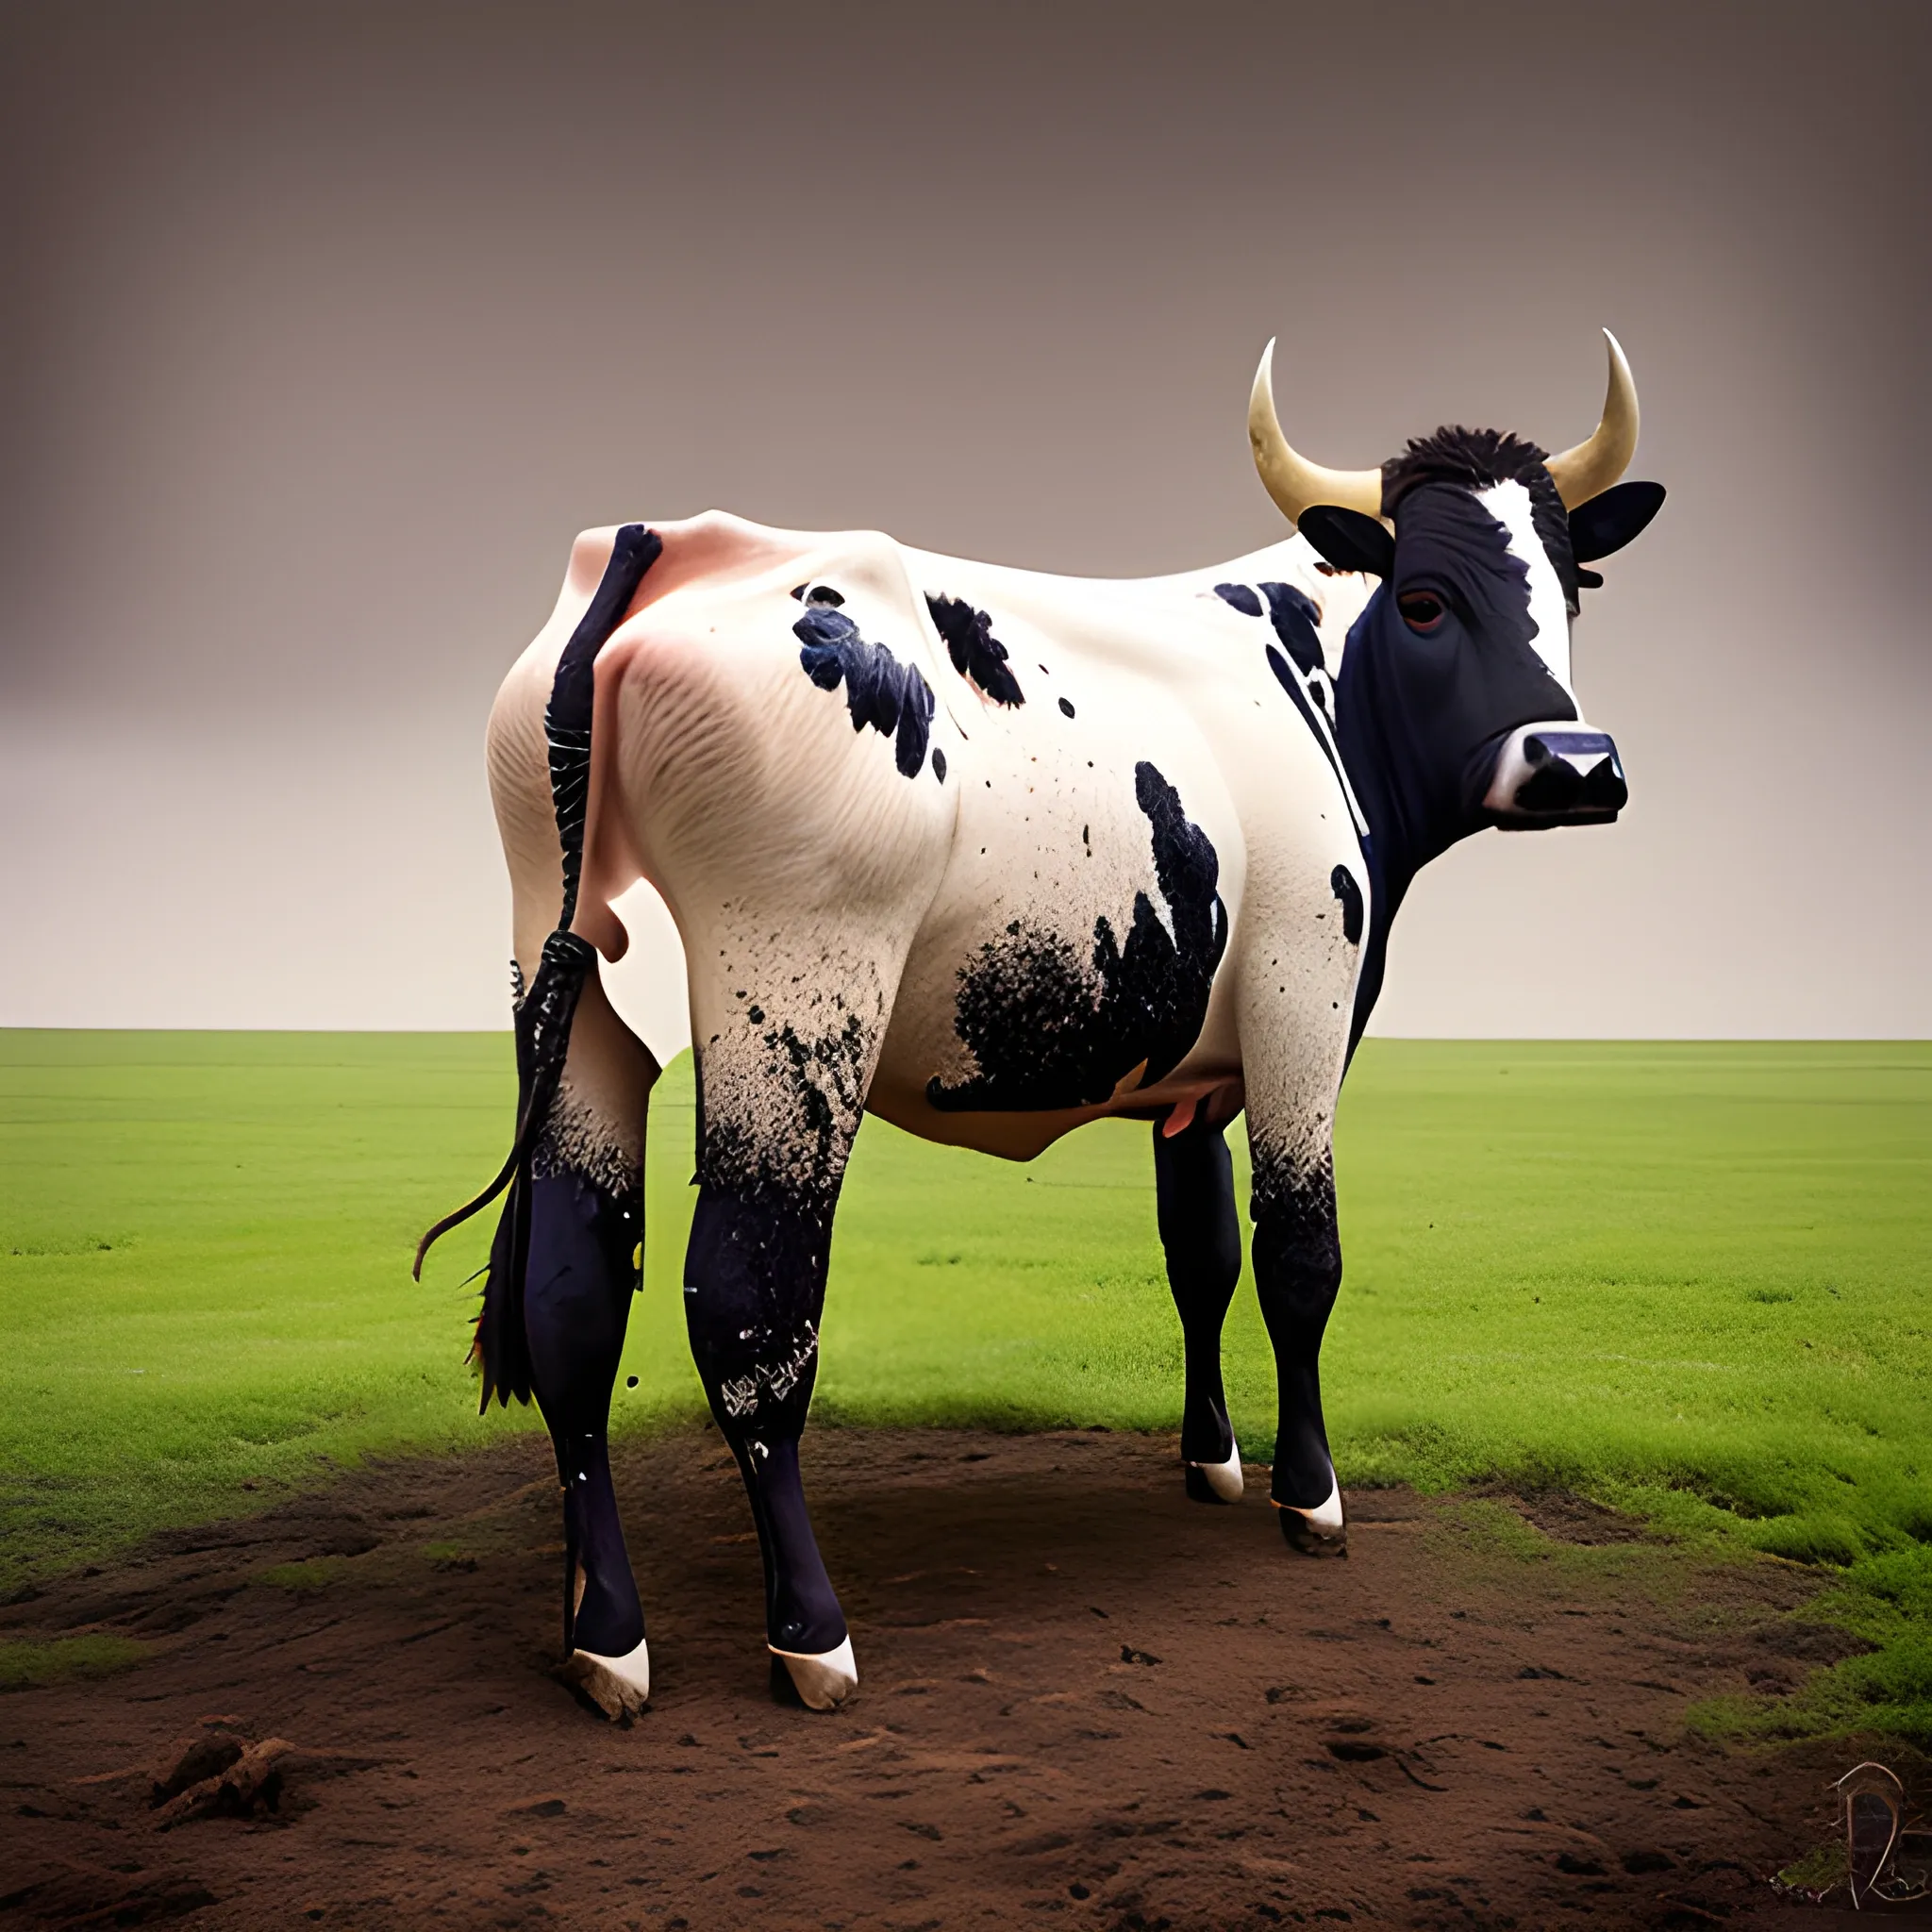 exploded cow, photography